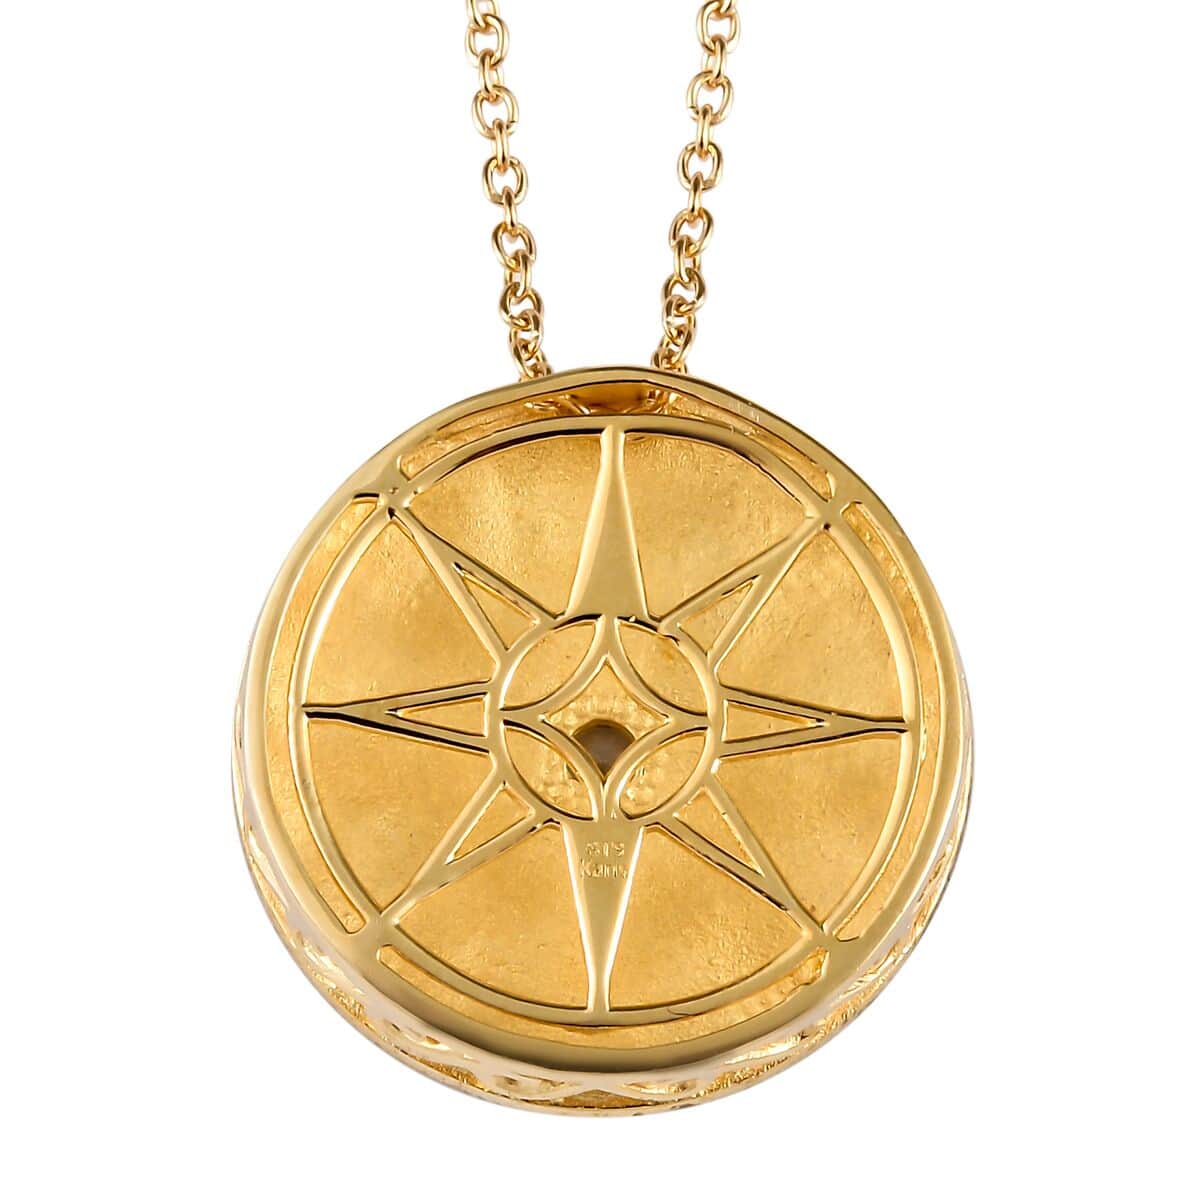 Karis White Zircon, Enameled Compass Style Pendant Necklace (20 Inches) in 18K YG Plated and ION Plated YG Stainless Steel 0.25 ctw , Tarnish-Free, Waterproof, Sweat Proof Jewelry image number 4